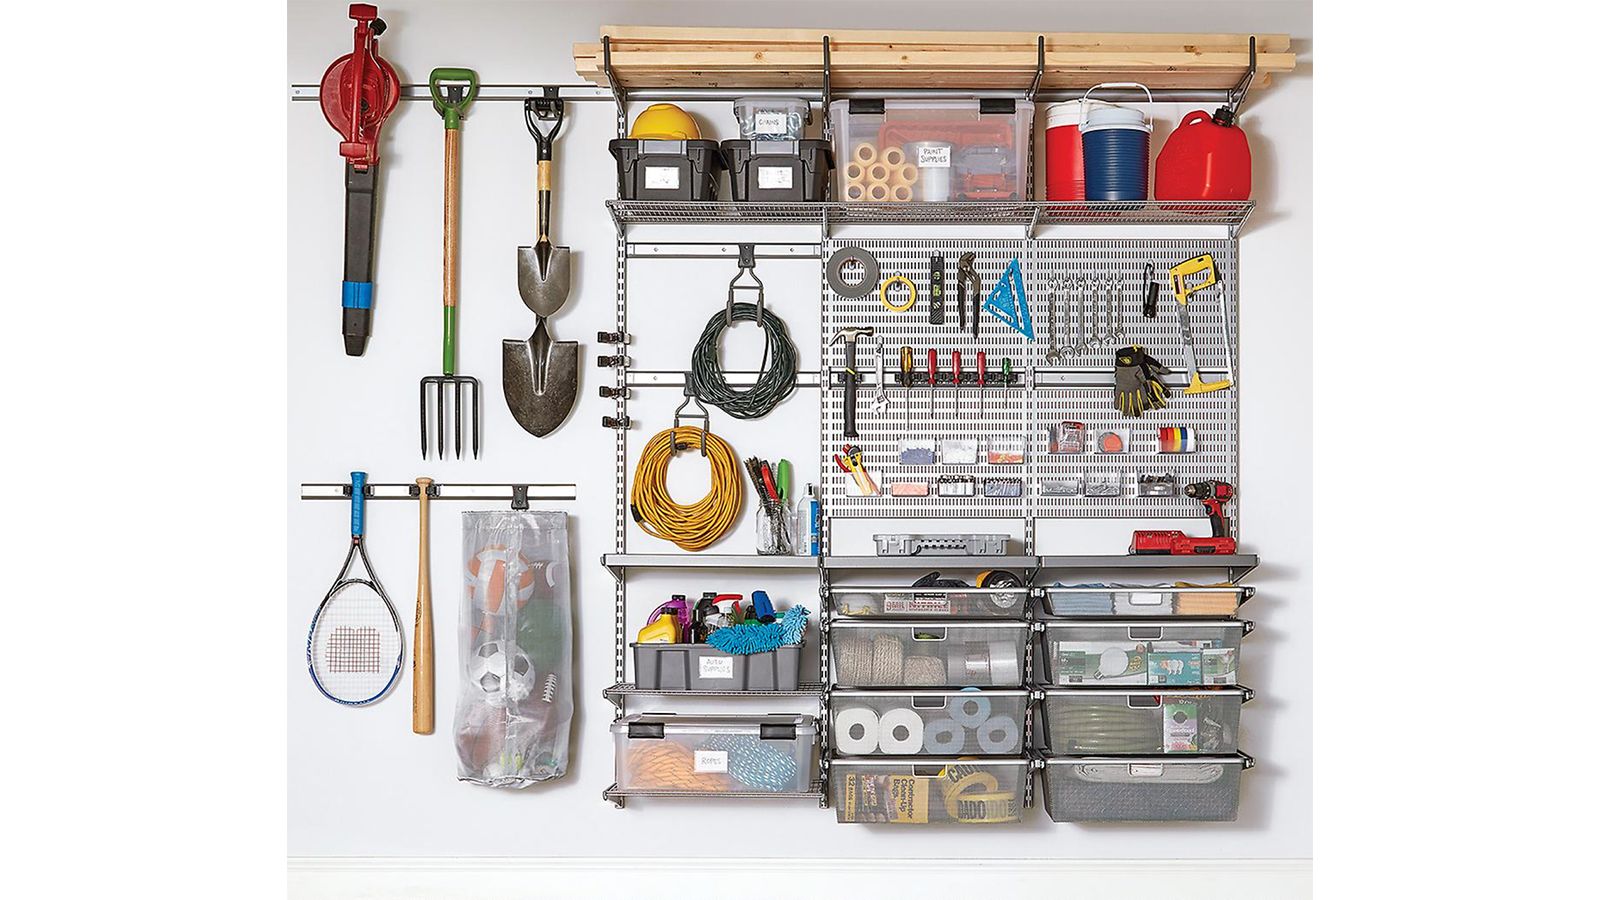 18 Tool Box Organization Ideas That Work for All Types of Tools